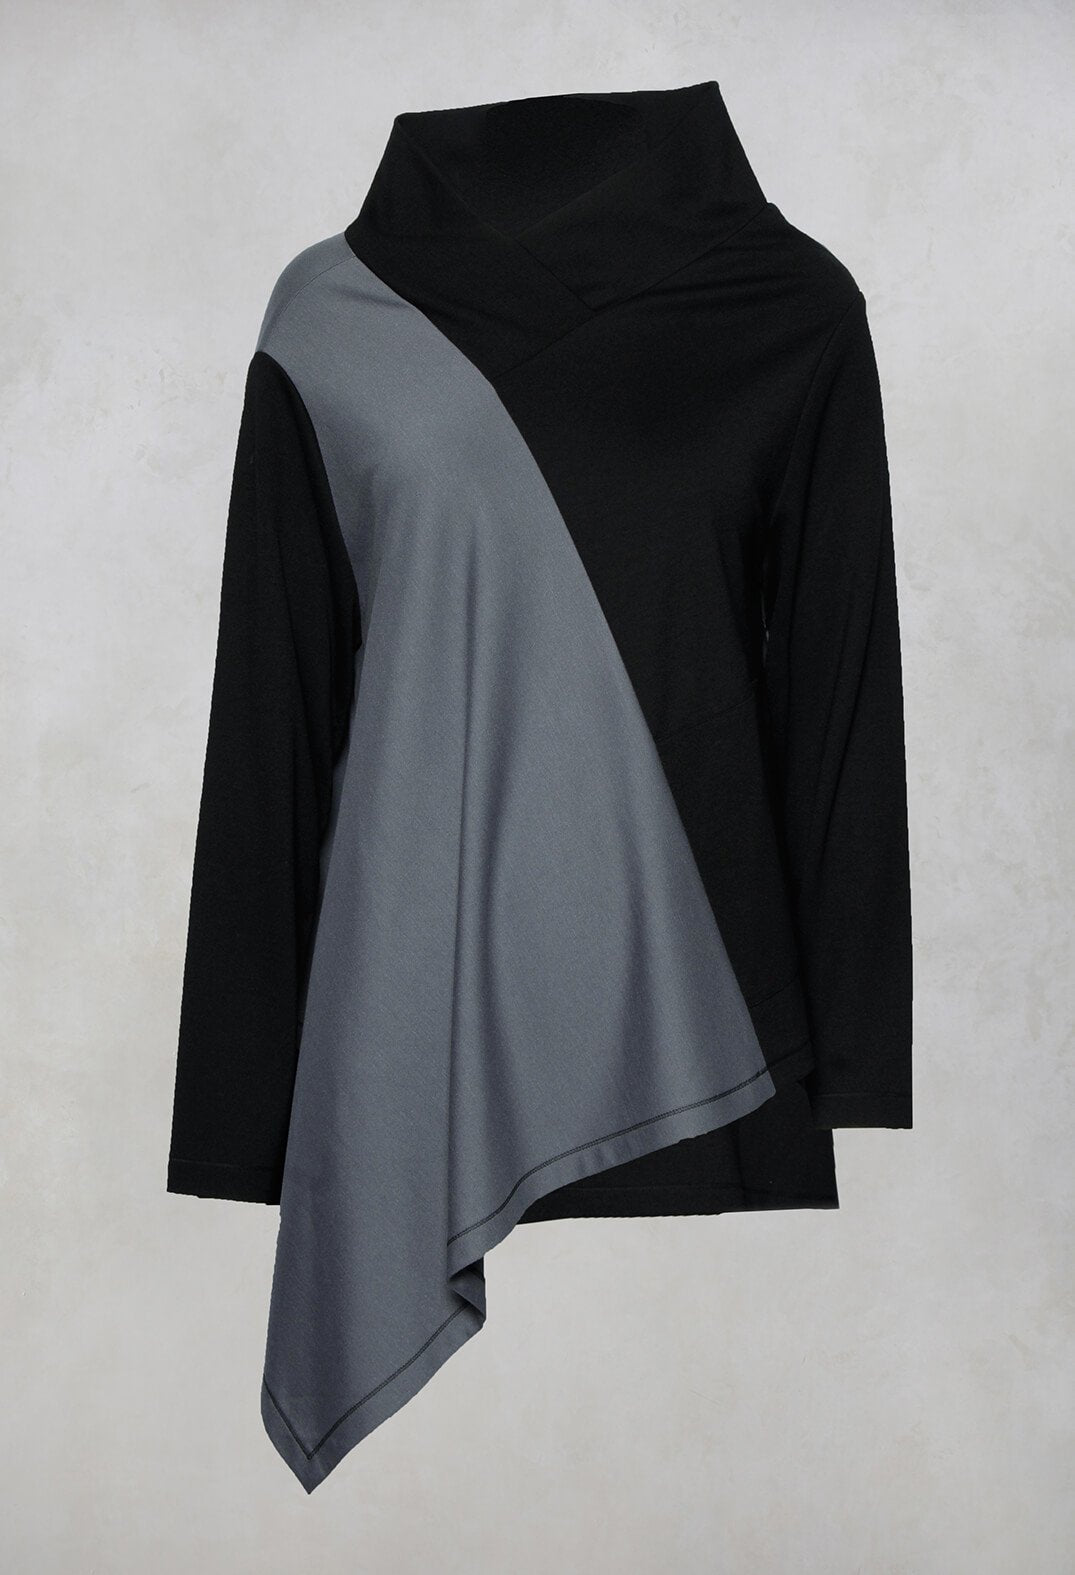 Cabi Top with Grey Panneling in Black and Grey